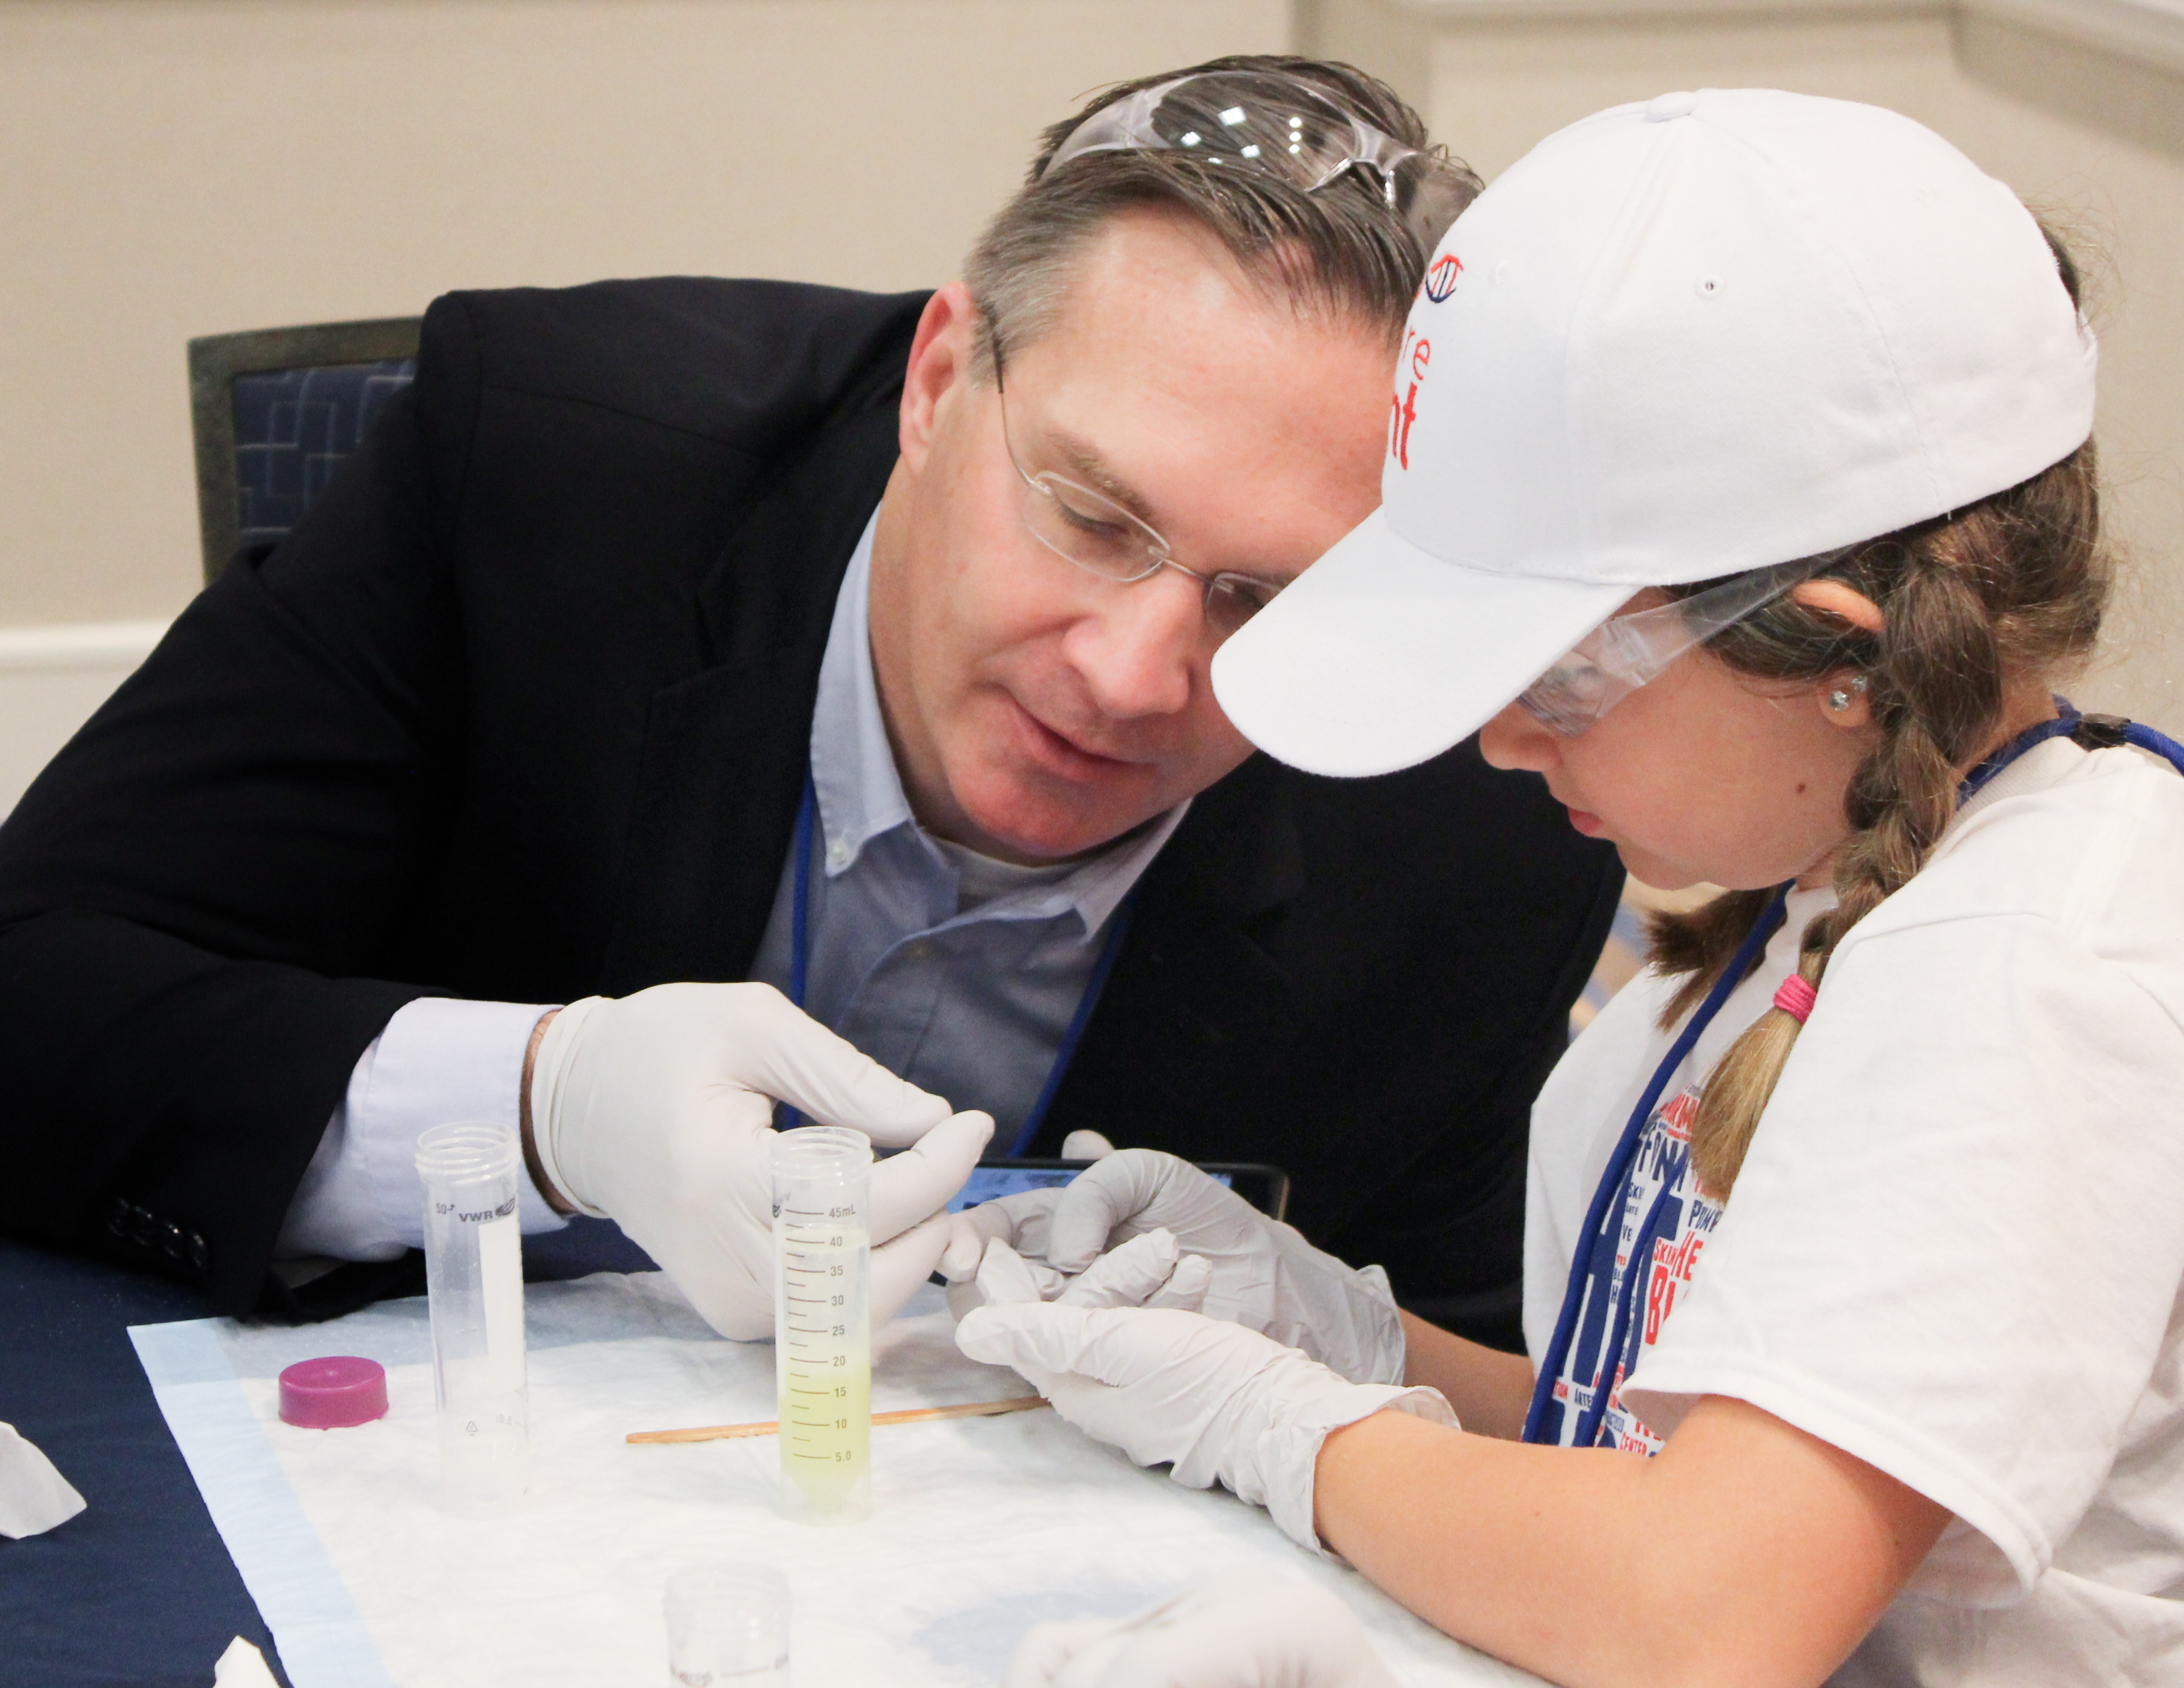 Dr. Joshua Murphy (left) speaking with a young female patient (right)